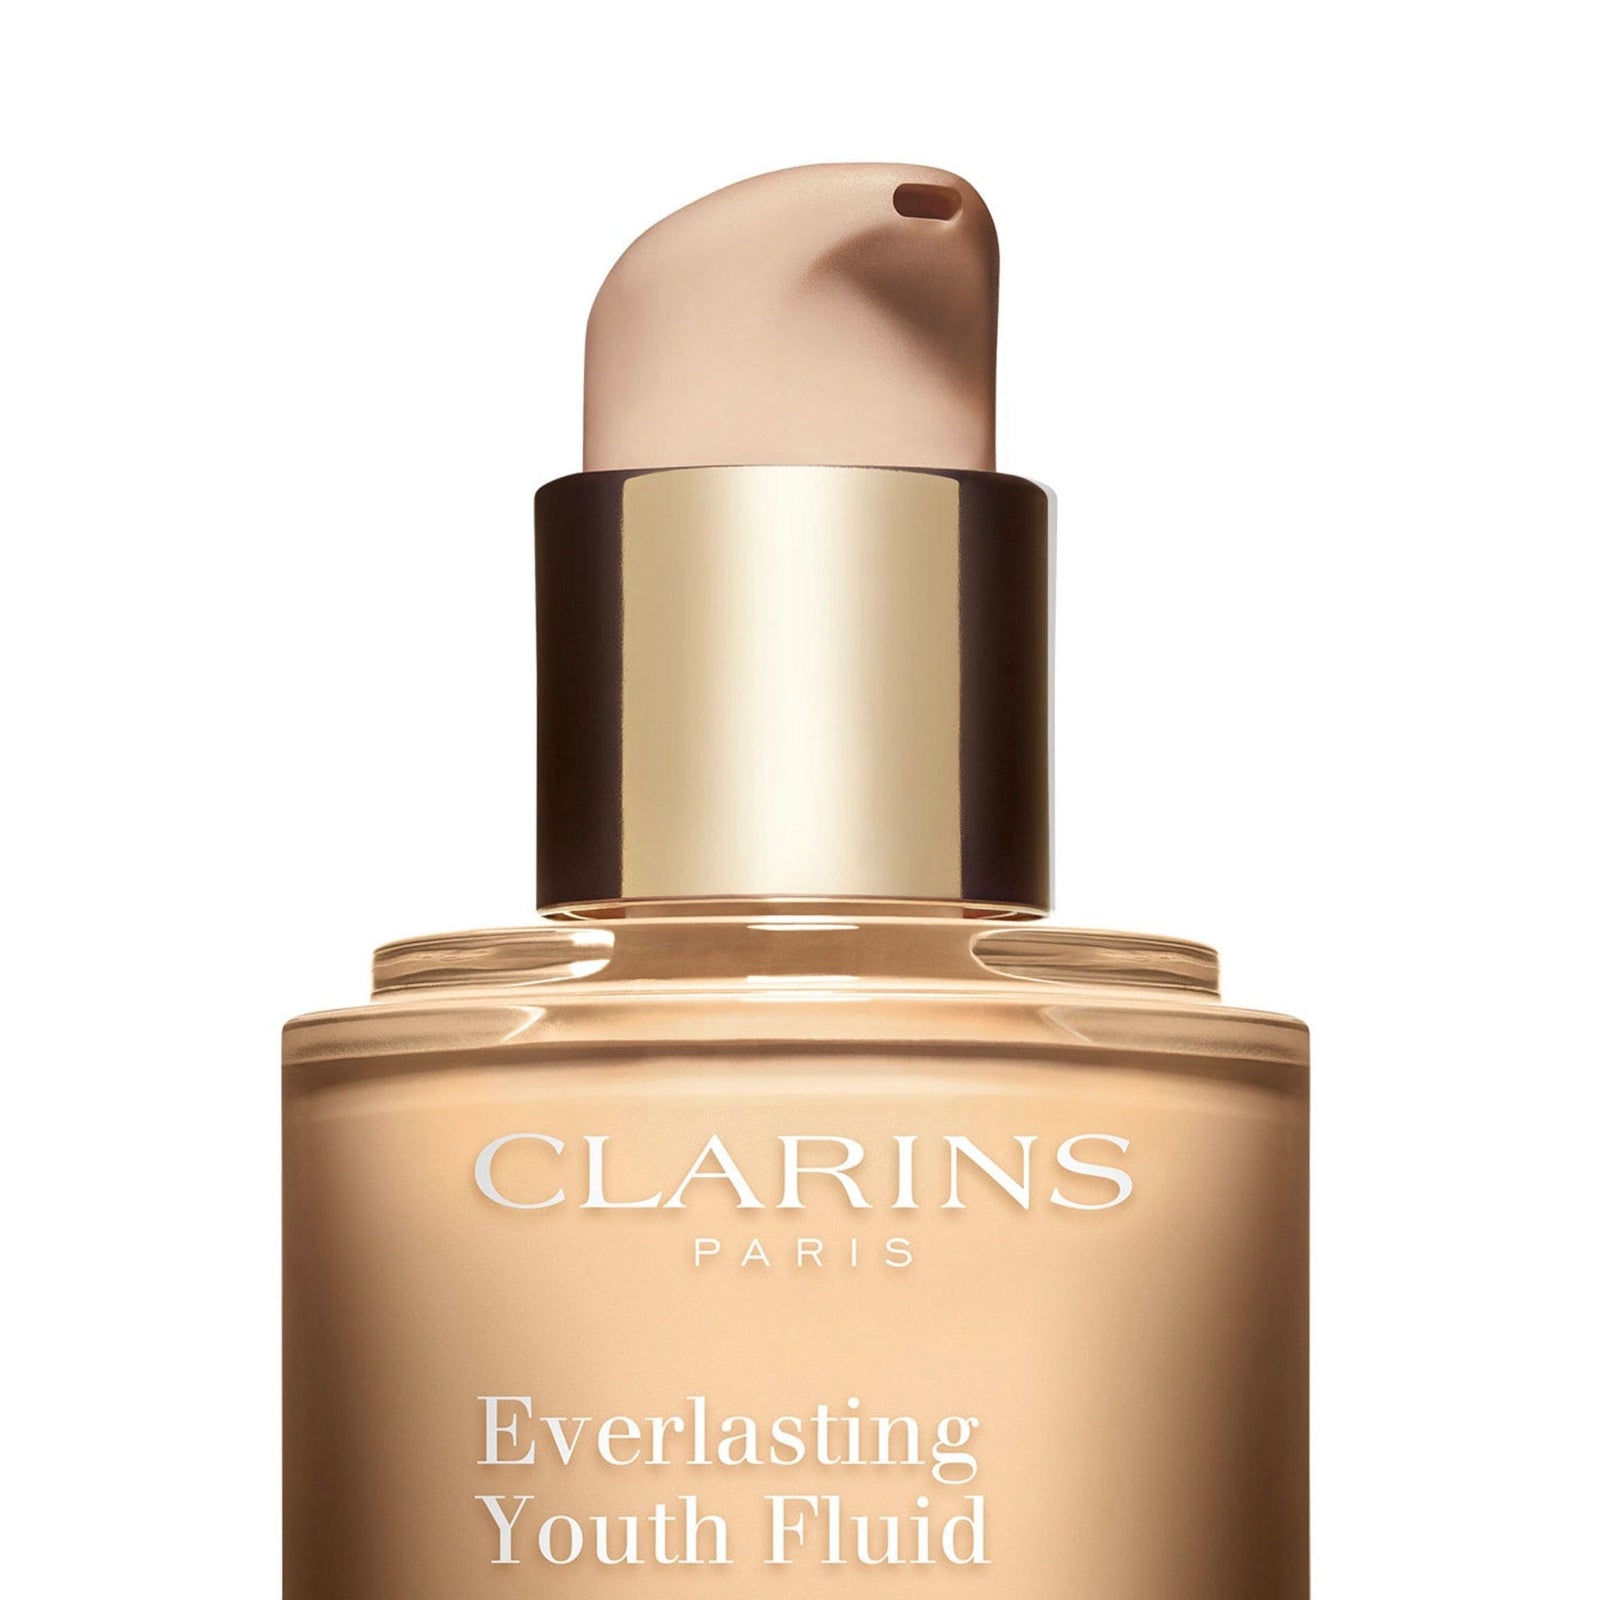 Clarins Everlasting Youth Fluid Foundation SPF 15 in 30ml